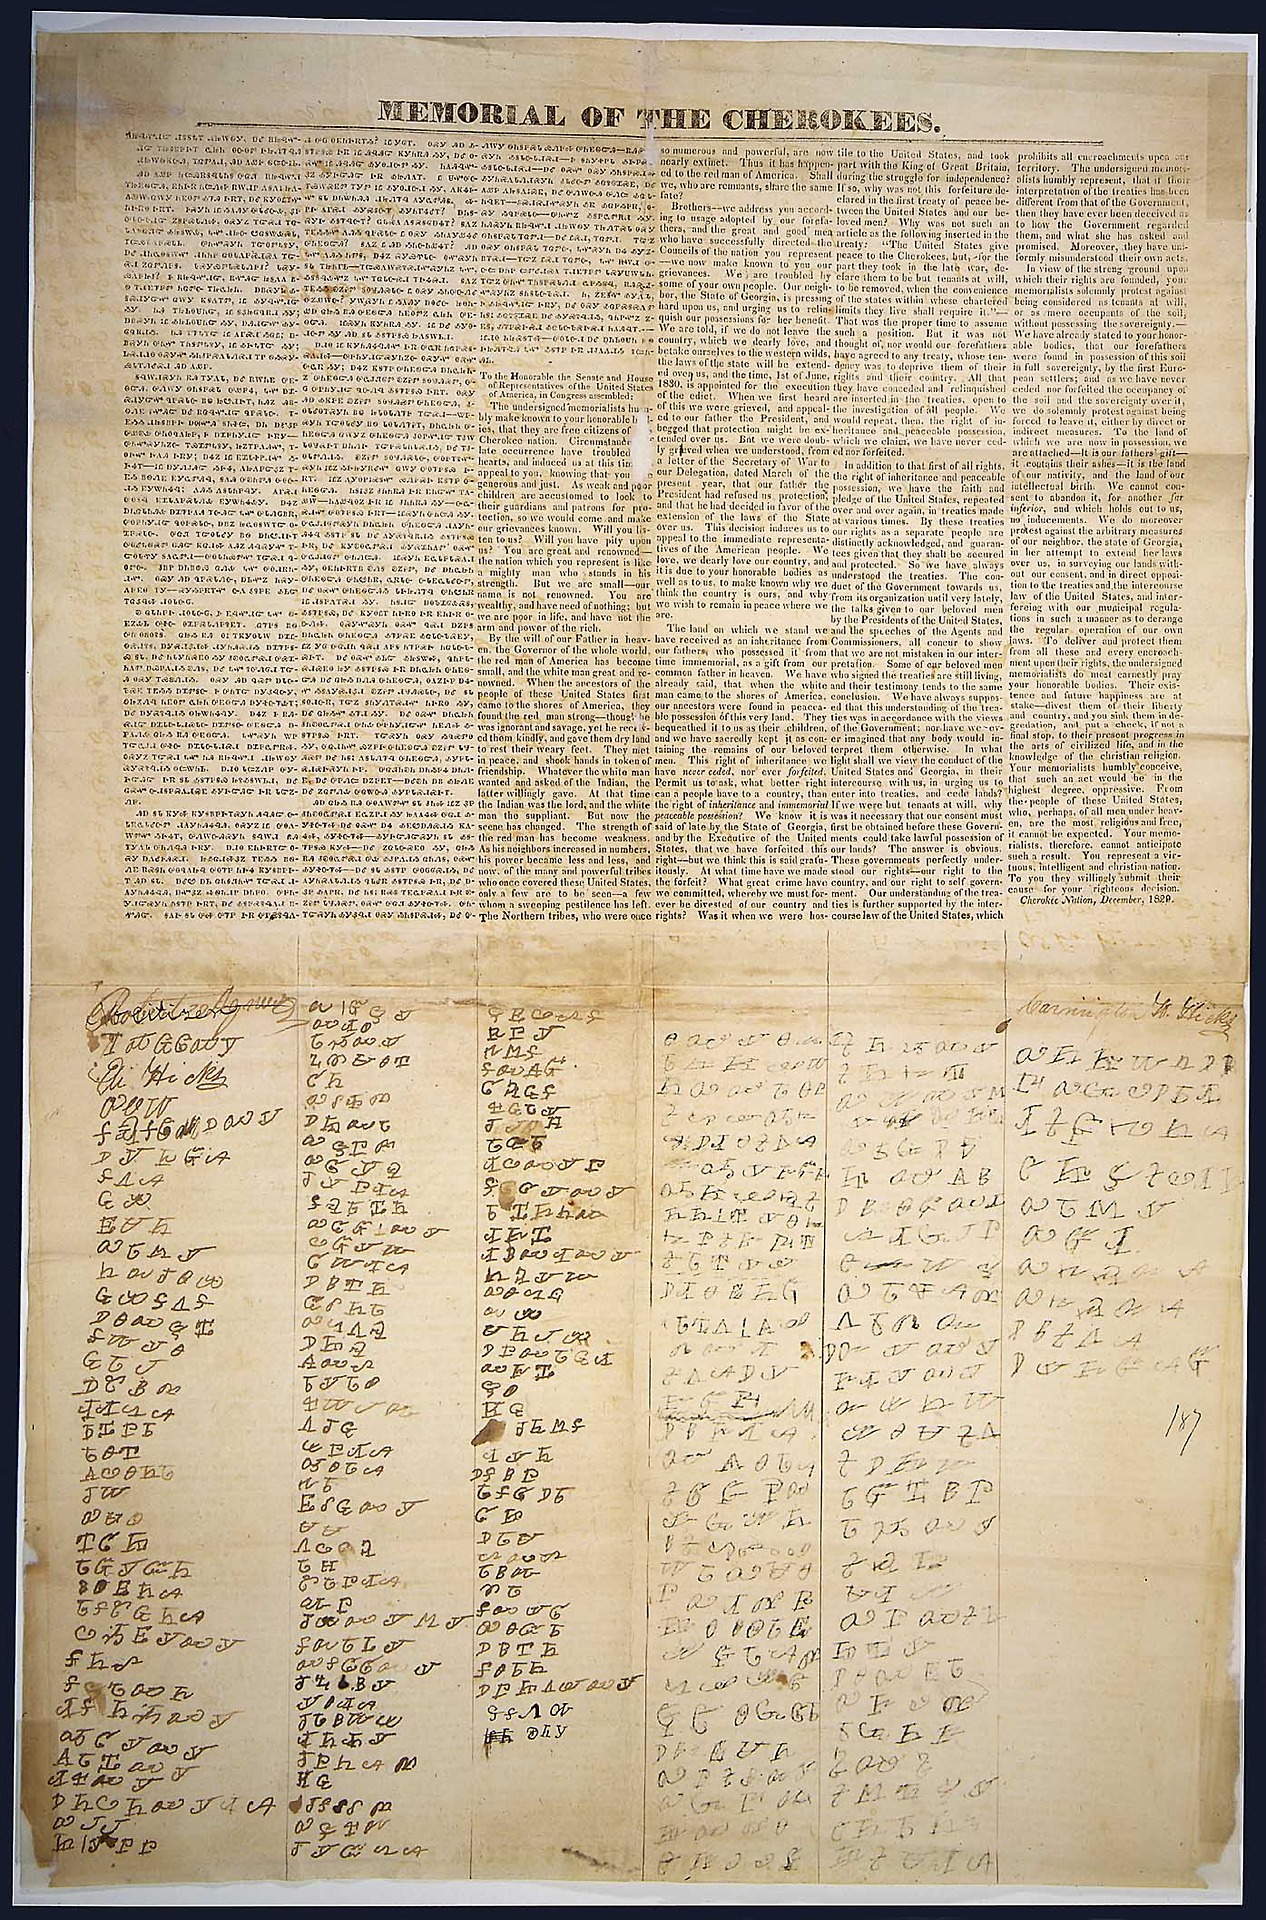 congressarchives:

Received by the U.S. House of Representatives on February 15, 1830 this petition from the Cherokee Nation, which was written in both Cherokee and English, asserted the tribe’s status as a sovereign nation in response to a bill which had been introduced to remove them from their land. Despite the petition, the legislation passed three months later, setting the stage for the eviction of the tribe in 1838 and the hardships they endured on the “Trail of Tears.”
Memorial of the Cherokees, HR 21A-H11, 2/15/1830, Records of the U.S. House of Representatives (ARC 306680)
